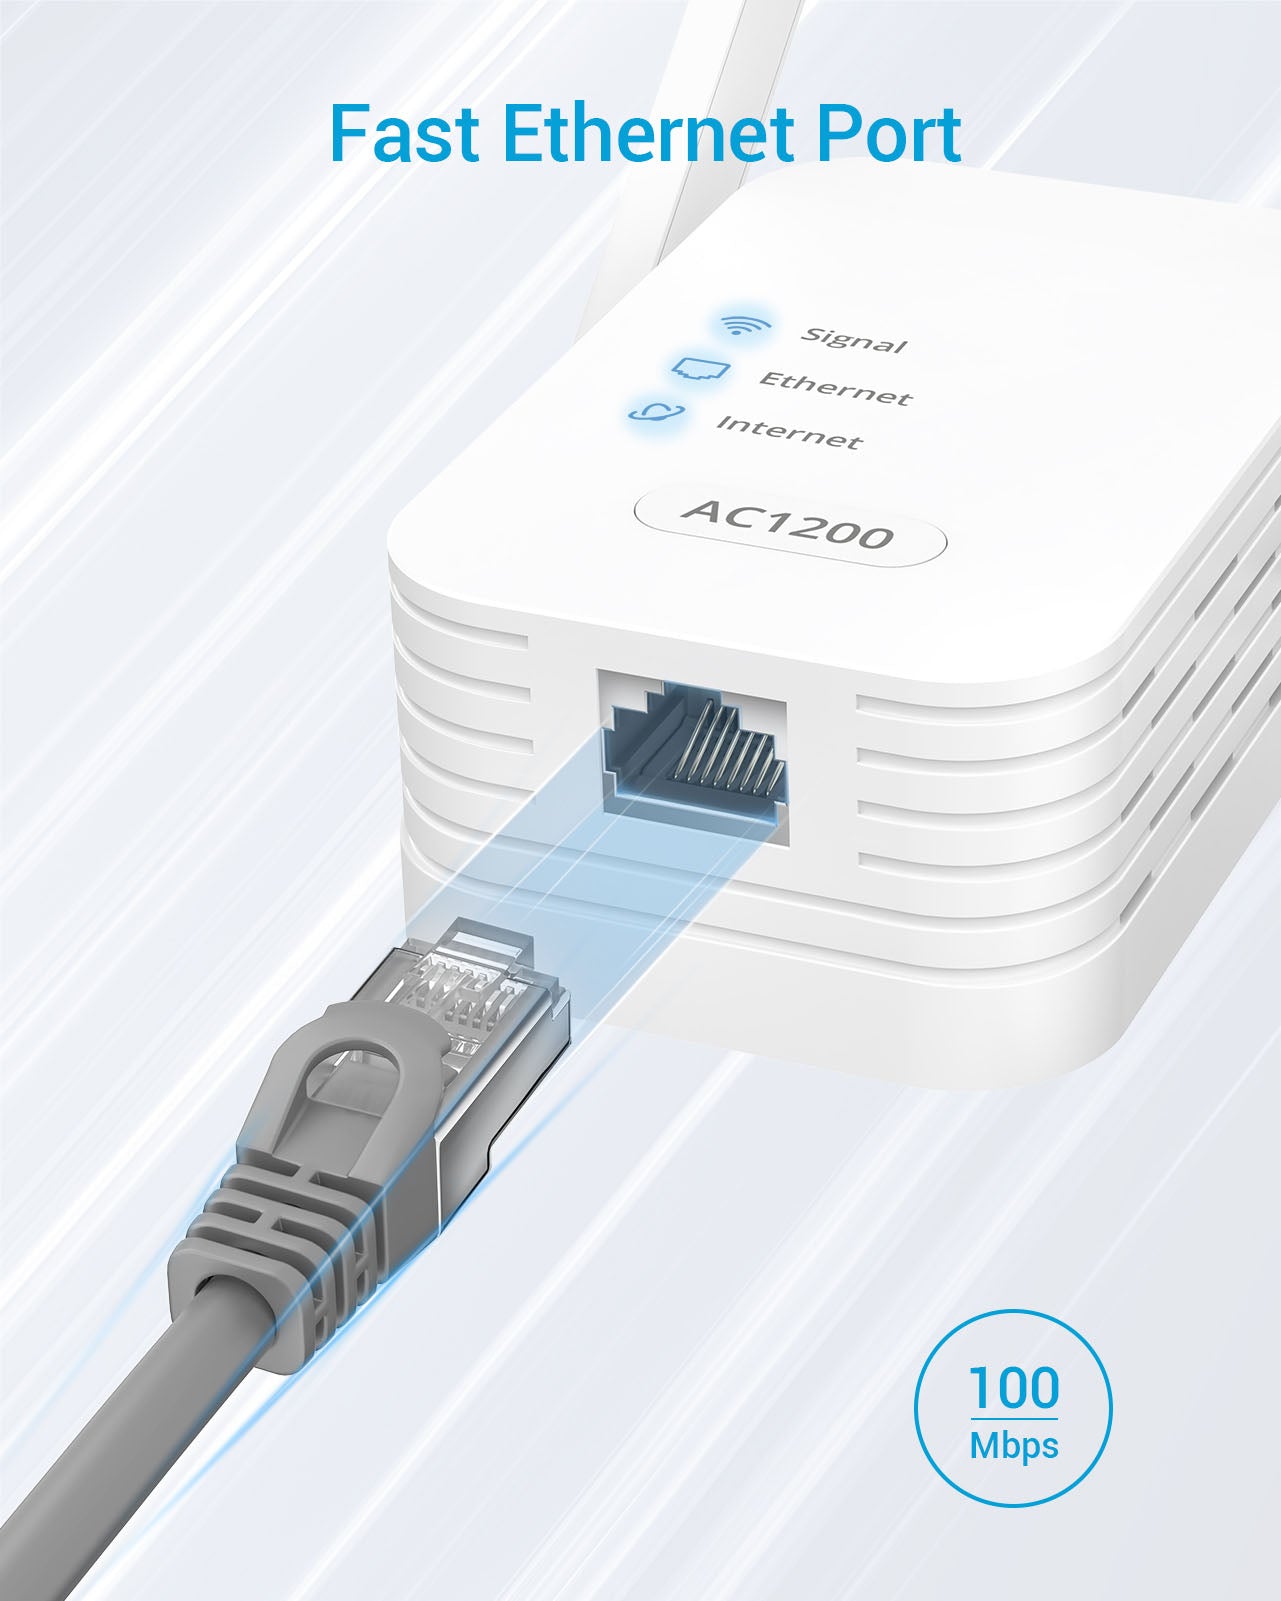 WiFi to Ethernet Adapter Grants Internet Access to Your Devices with 100Mbps Fast Ethernet Port